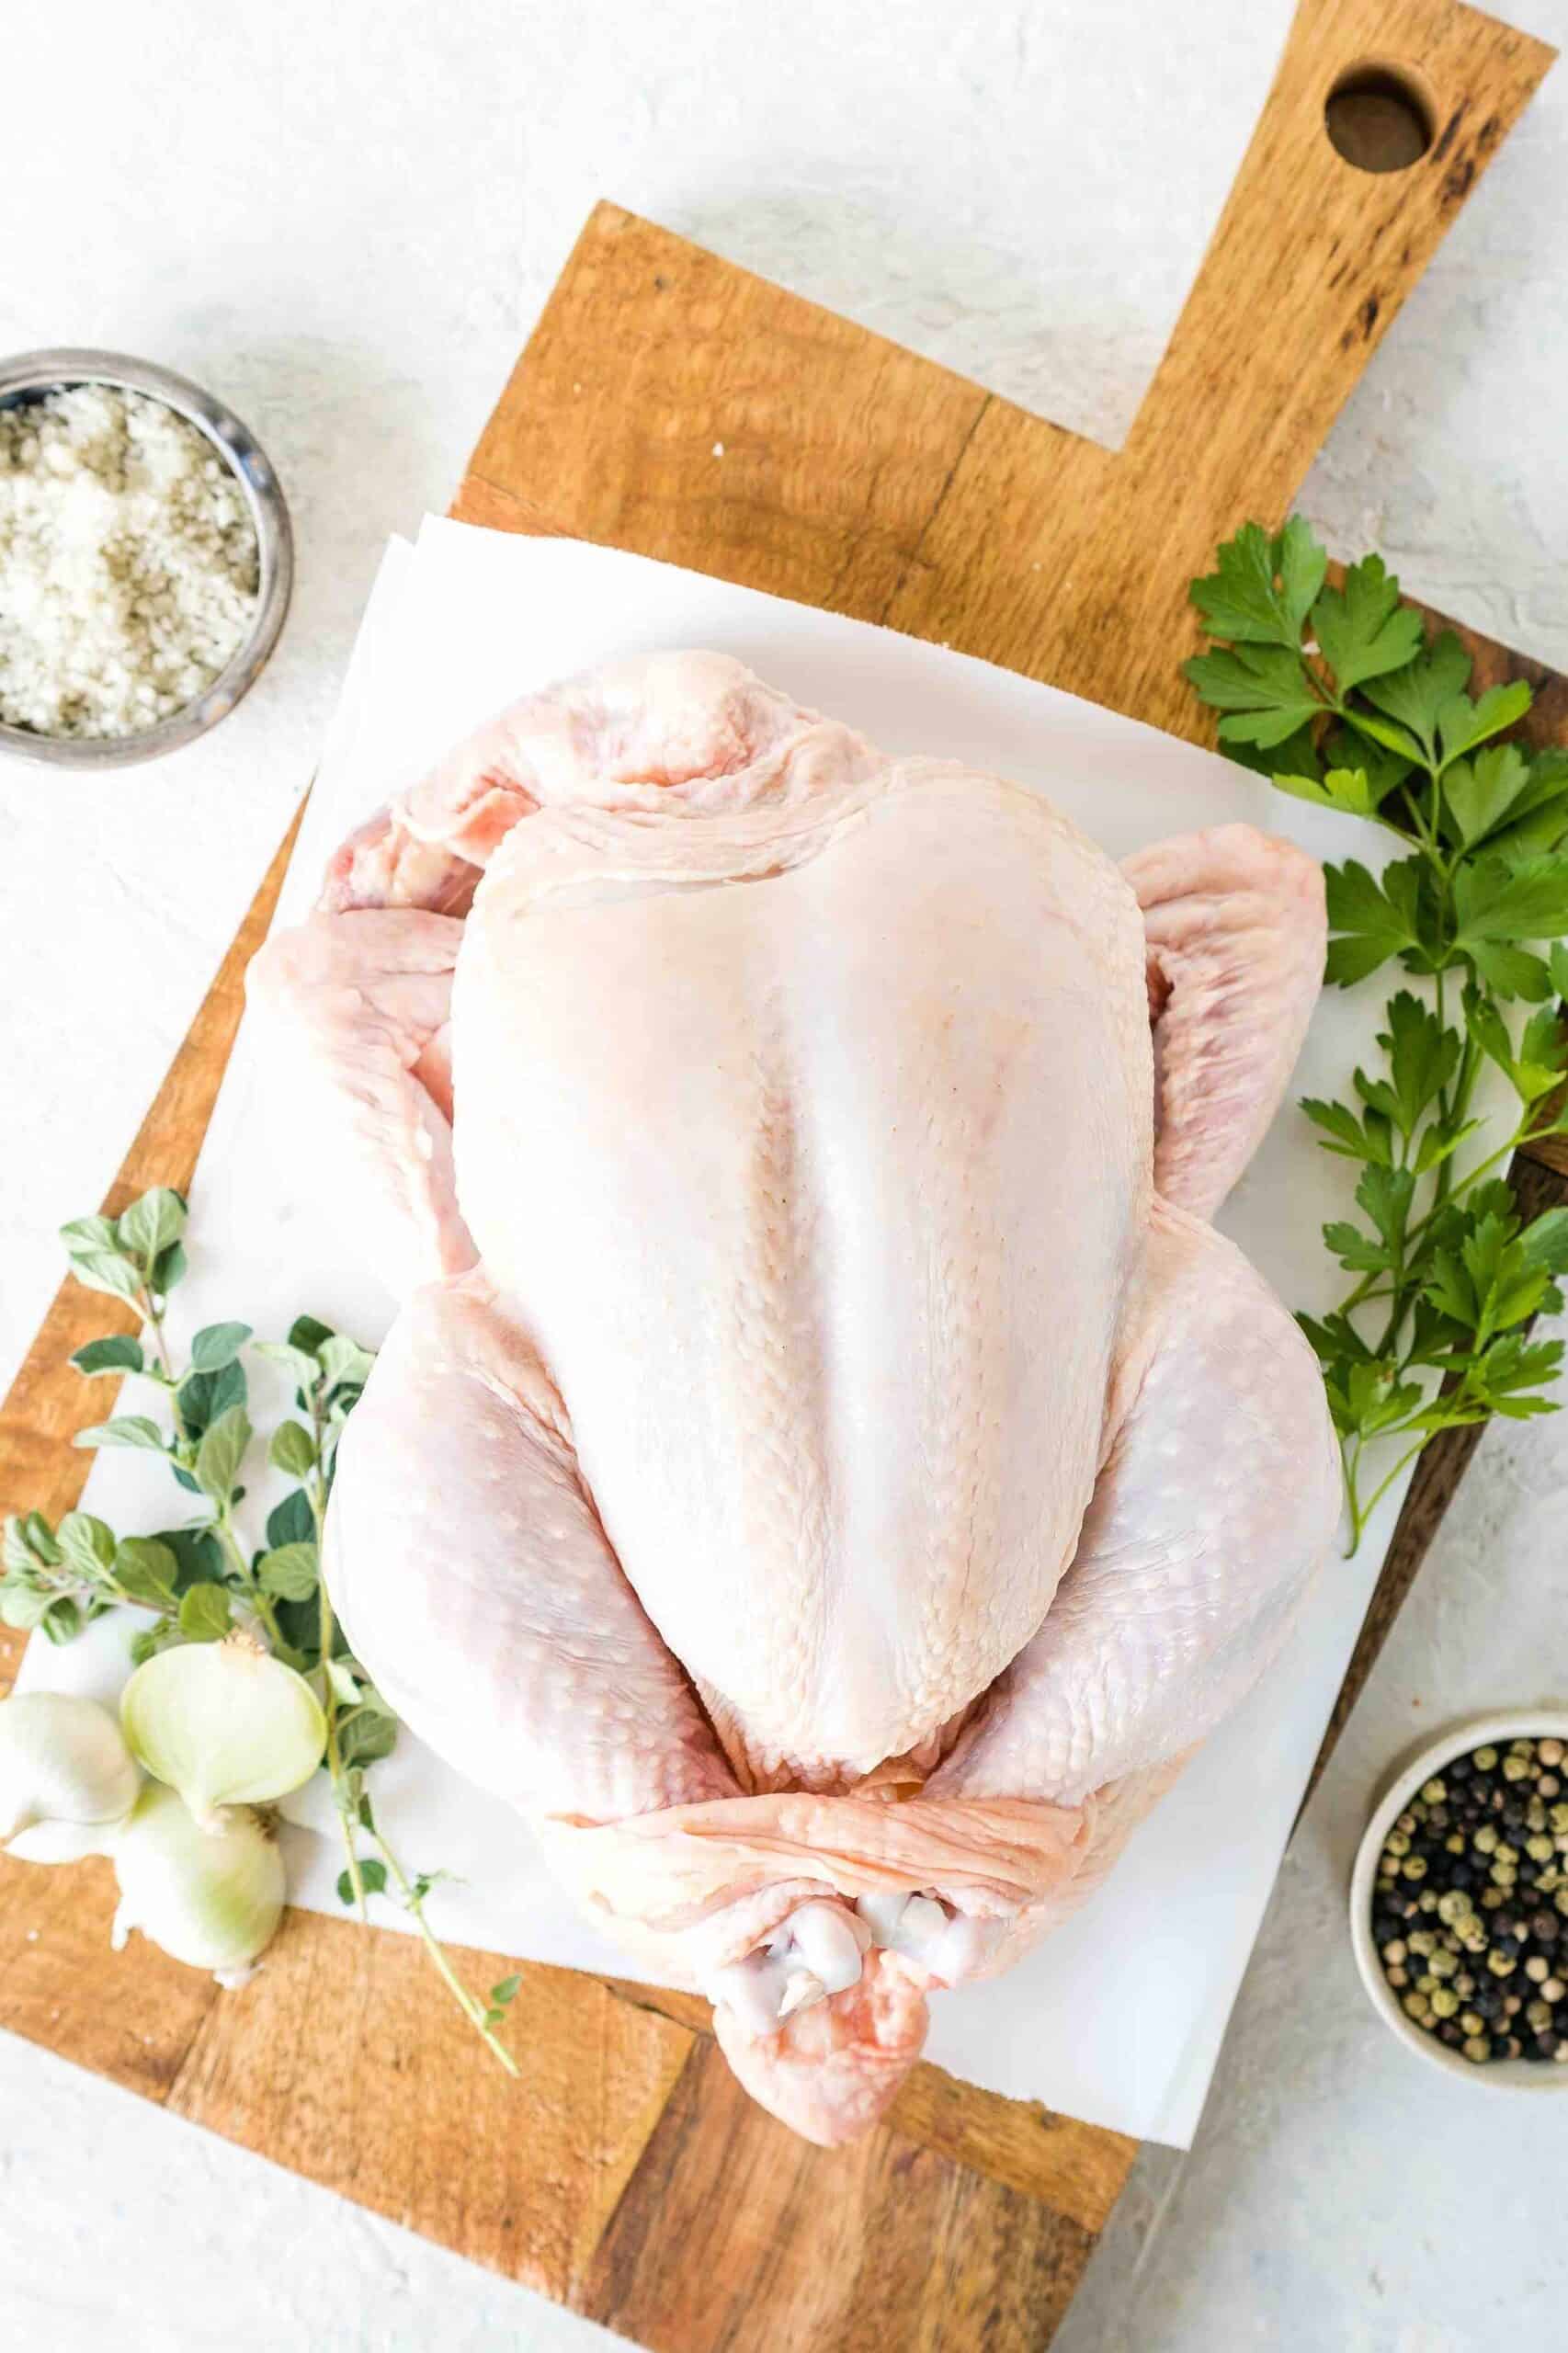 image of whole chicken with skin on a chopping board with accompaniments on the side